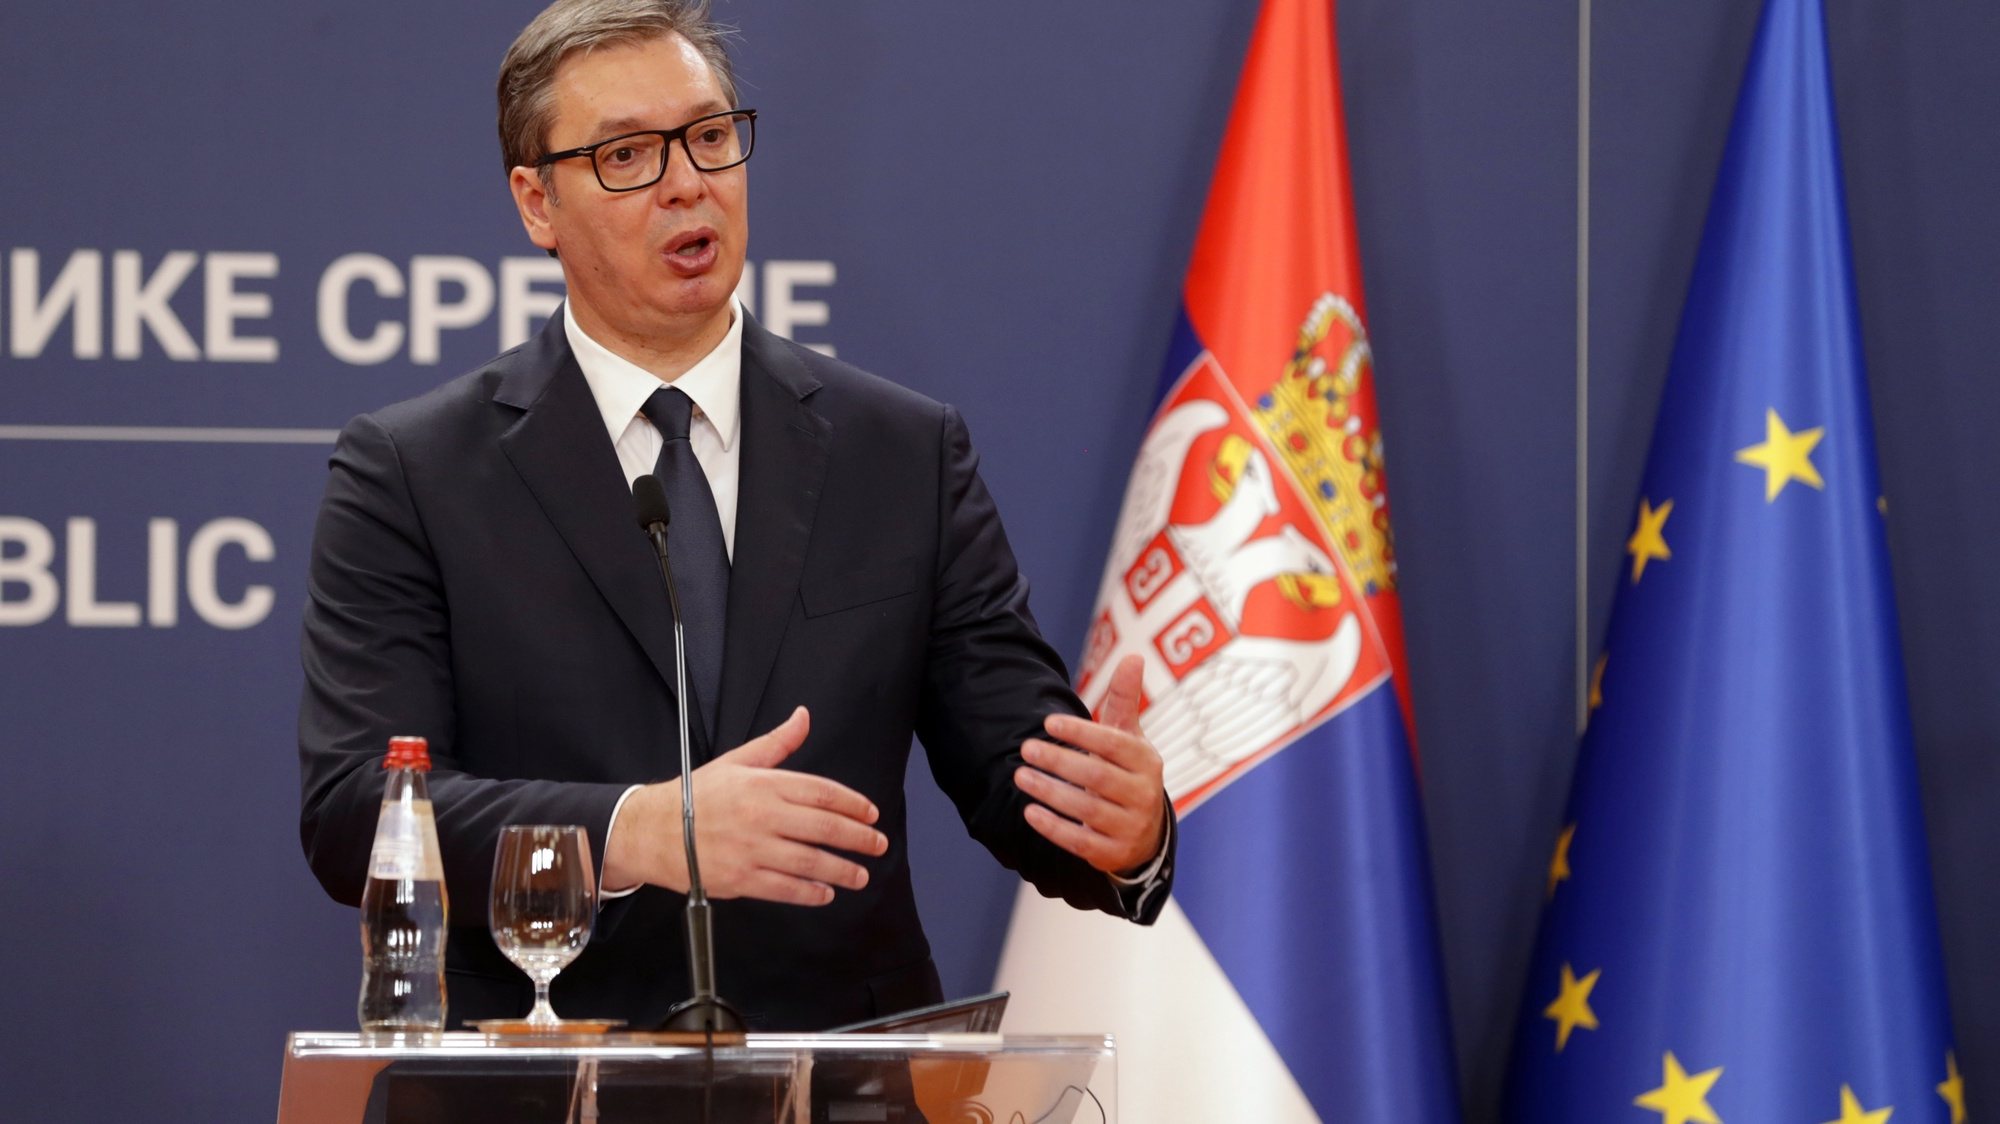 epa10097625 Serbian President Aleksandar Vucic speaks during a press conference with Spanish Prime Minister after their meeting in Belgrade, Serbia, 29 July 2022. Prime Minister Sanchez is on an official state visit to Serbia.  EPA/ANDREJ CUKIC